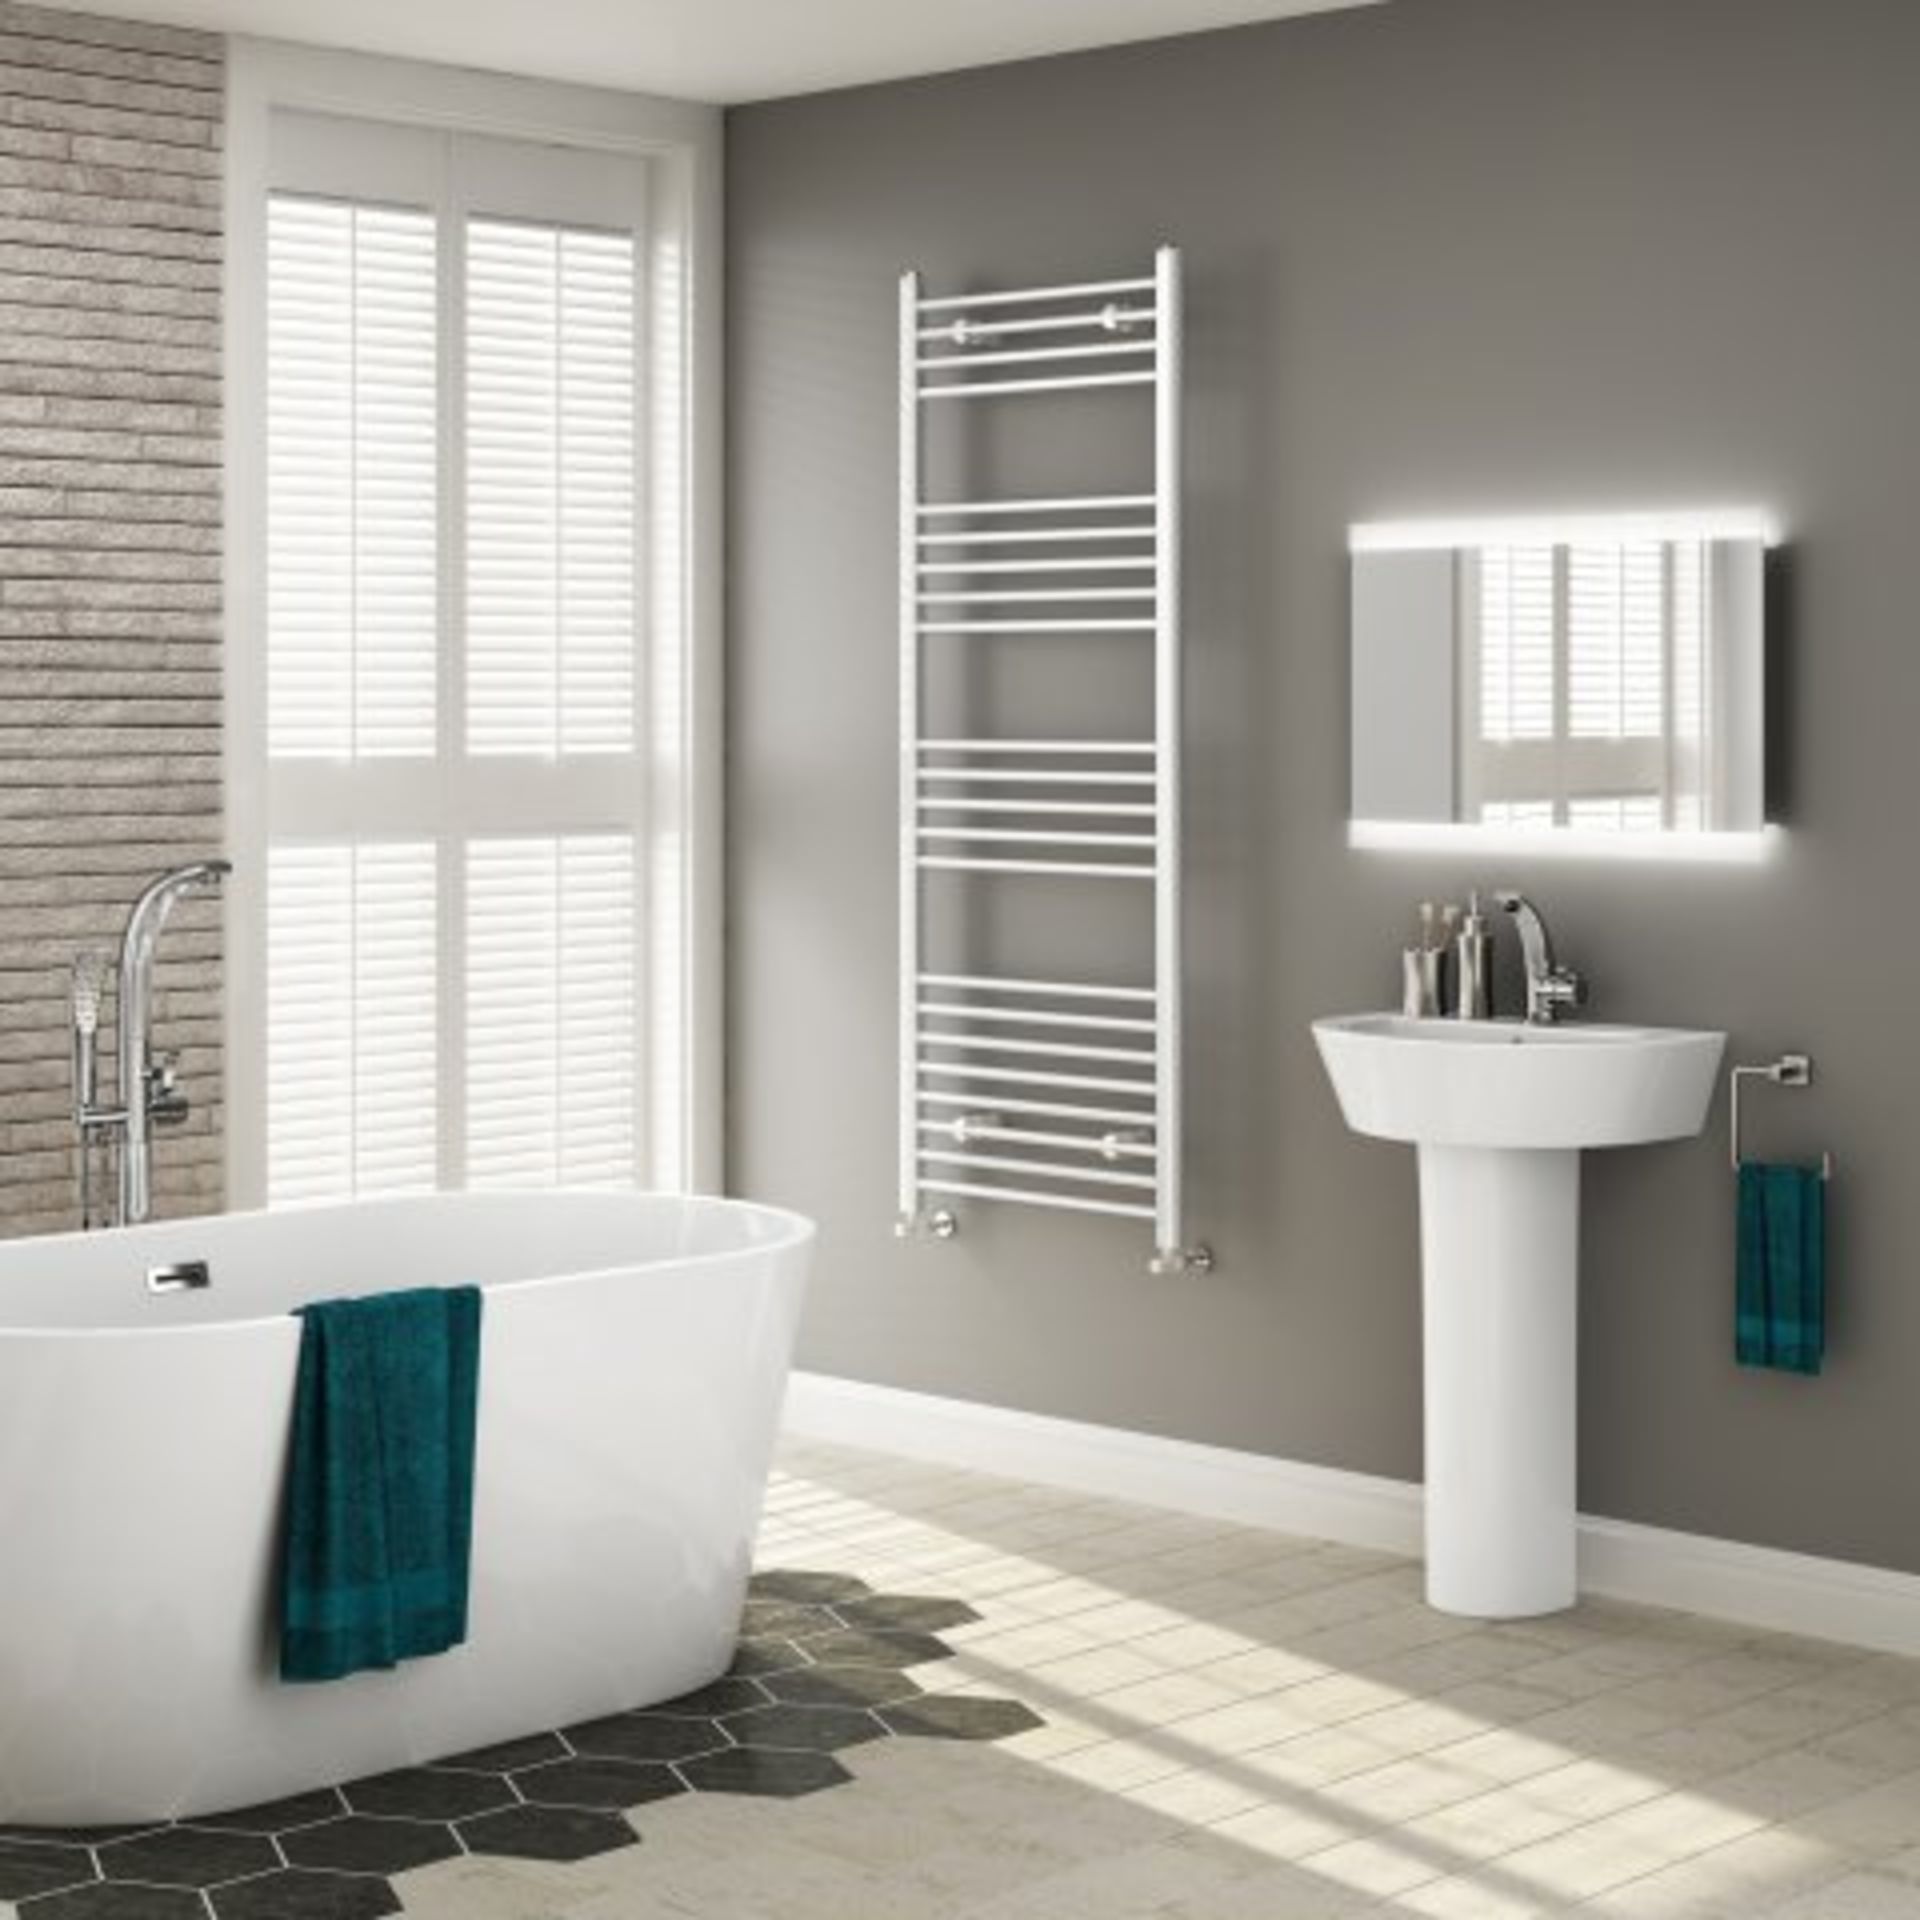 (H12) 1600x600mm White Straight Rail Ladder Towel Radiator. Offering durability and style, our Polar - Image 2 of 3